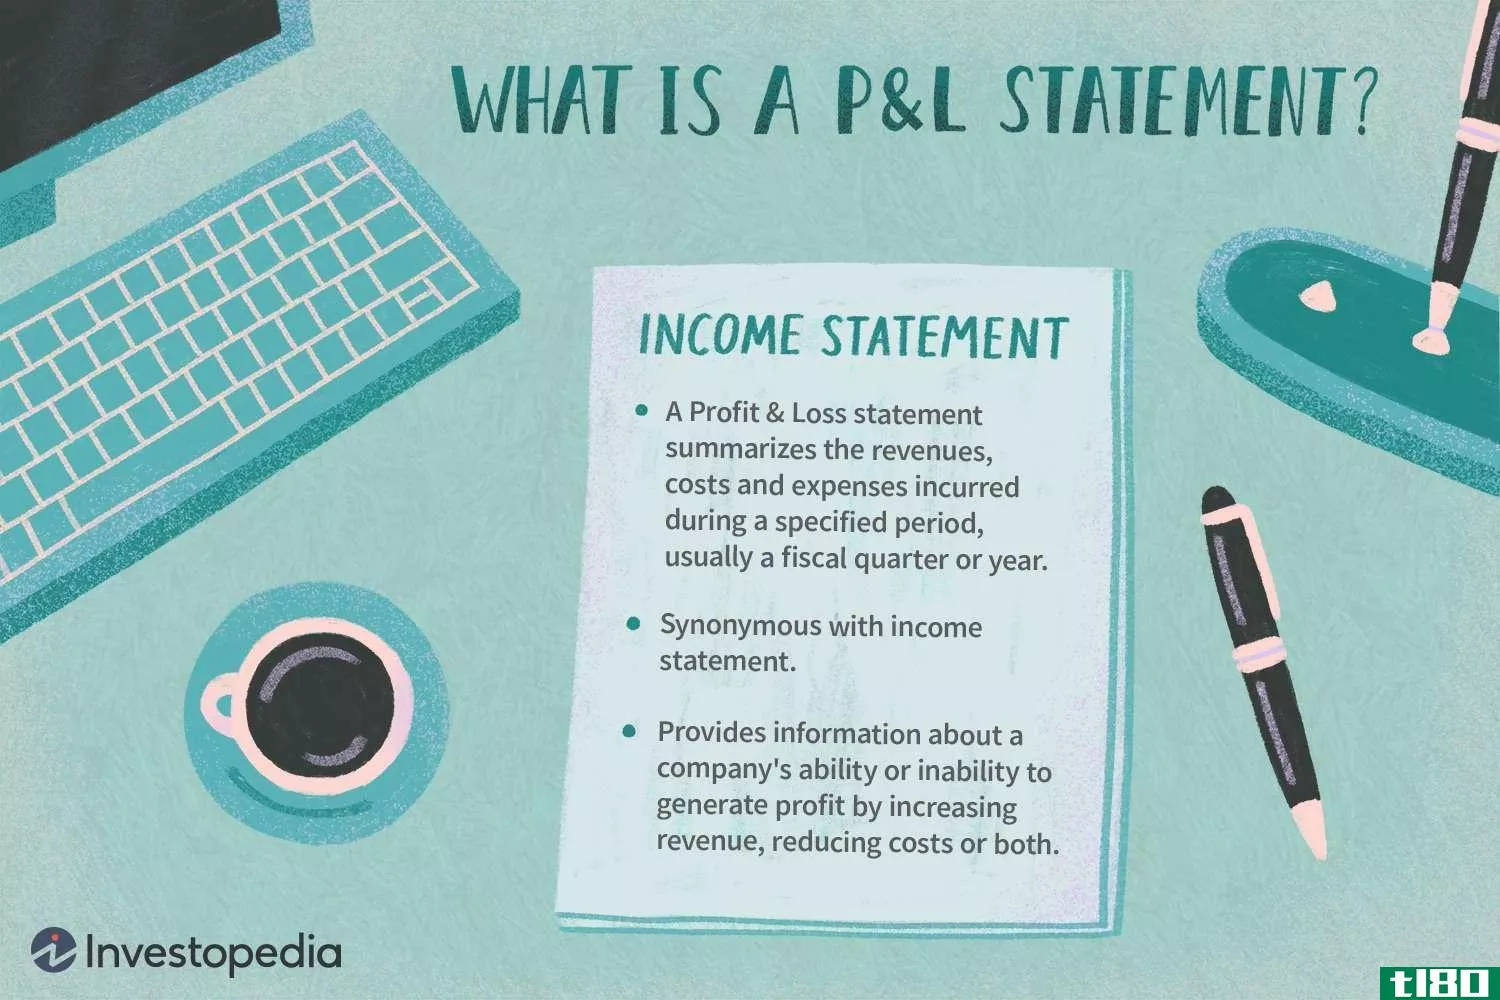 What is a P&L Statement?